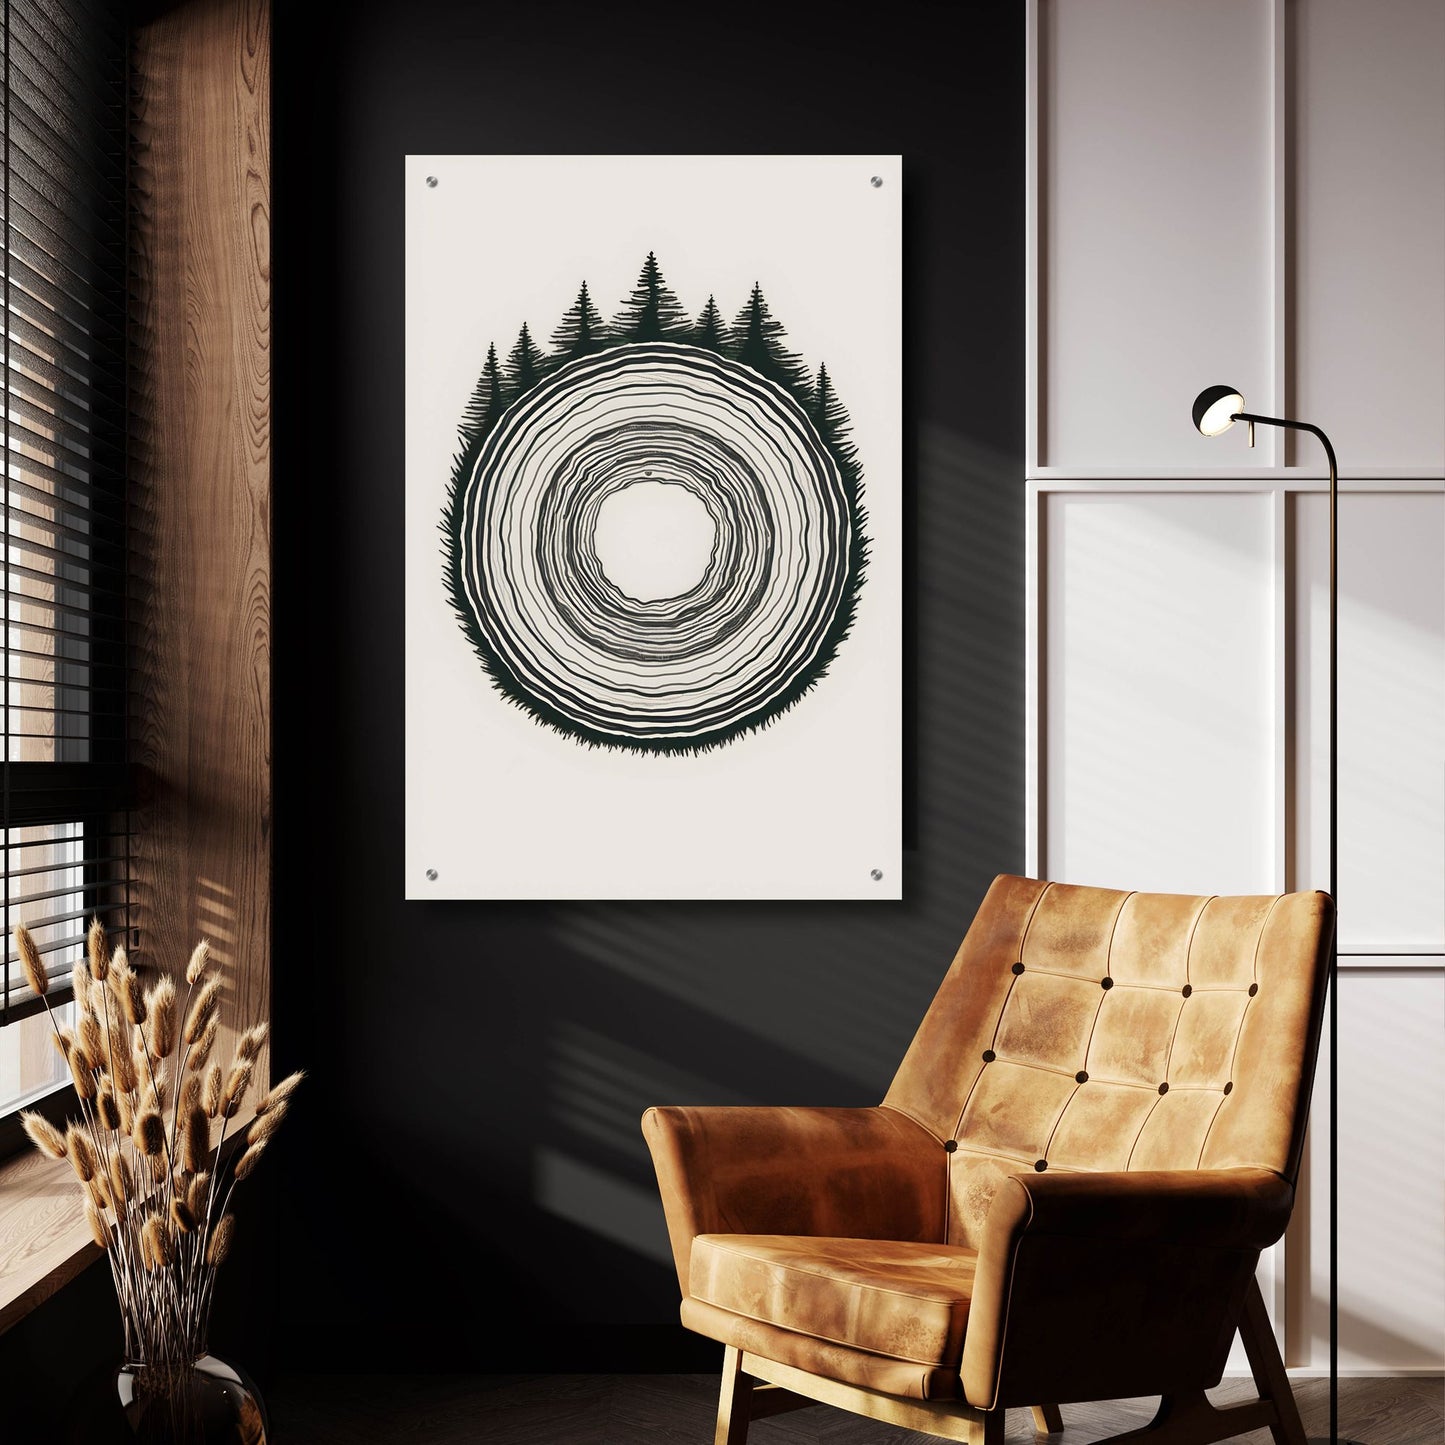 Epic Art 'Nature Inspired 13' by Petals Prints Design, Acrylic Glass Wall Art,24x36